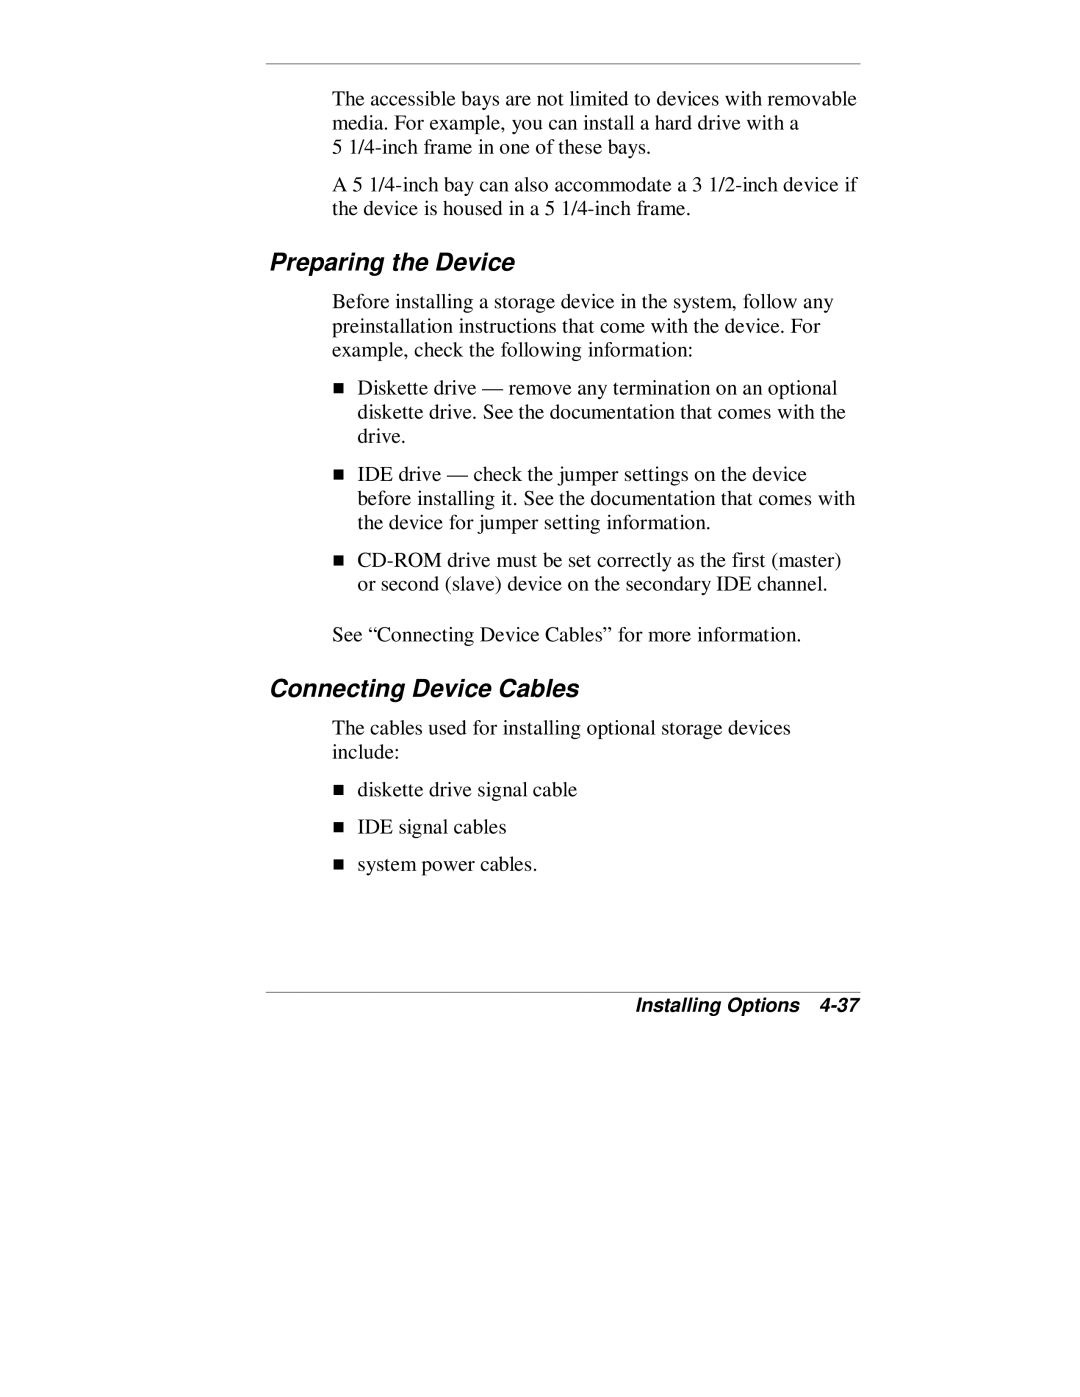 NEC VT 300 Series manual Preparing the Device, Connecting Device Cables 